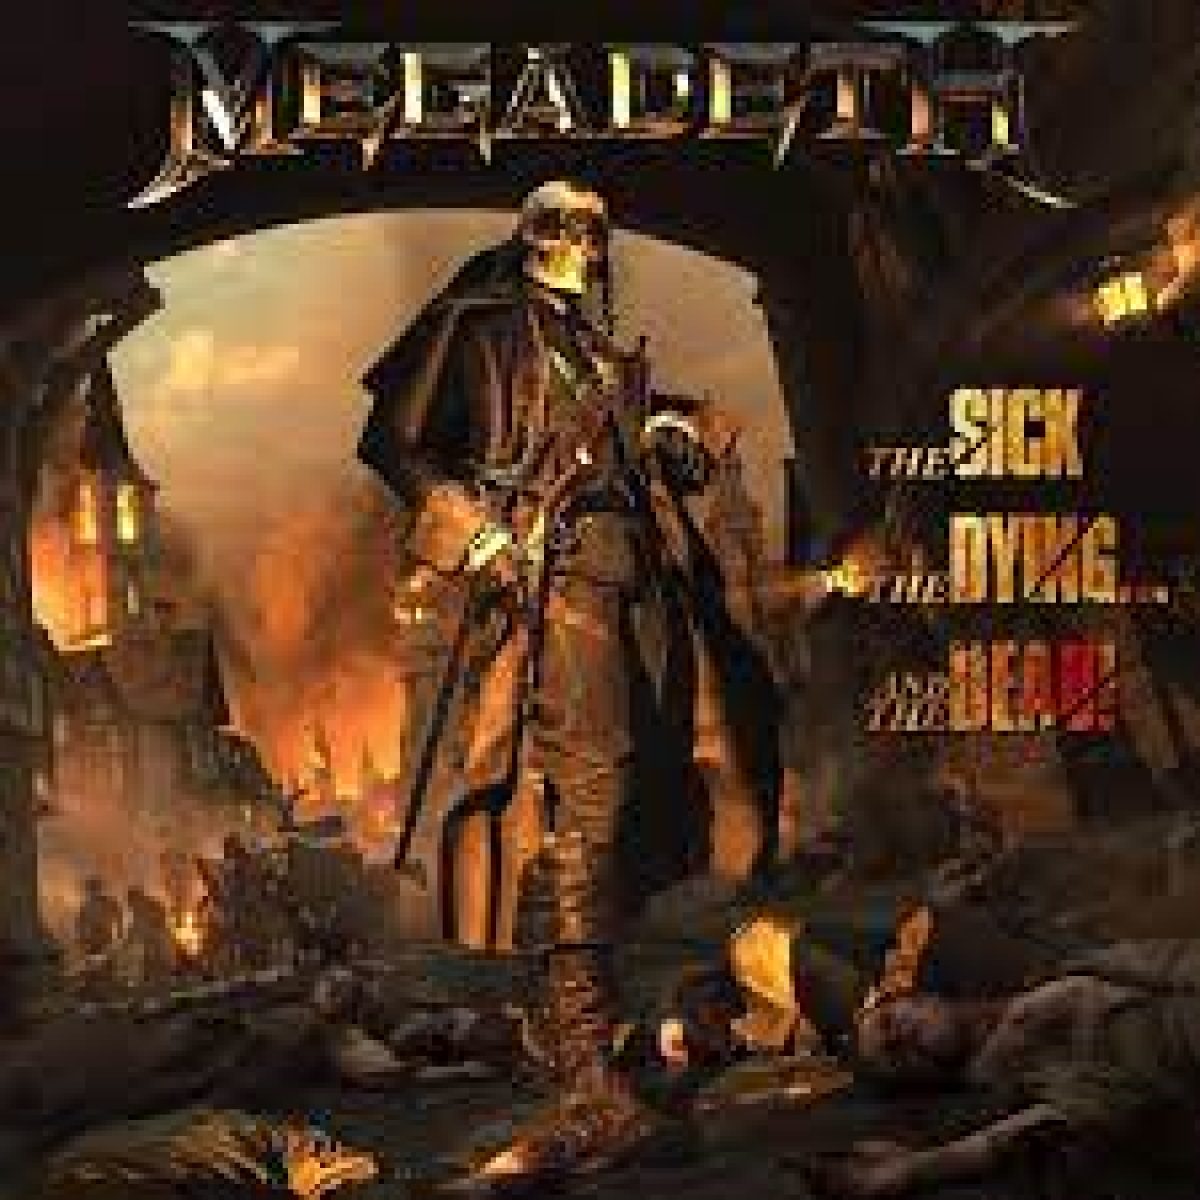 Megadeth, The Sick, The Dying...And the Dead!